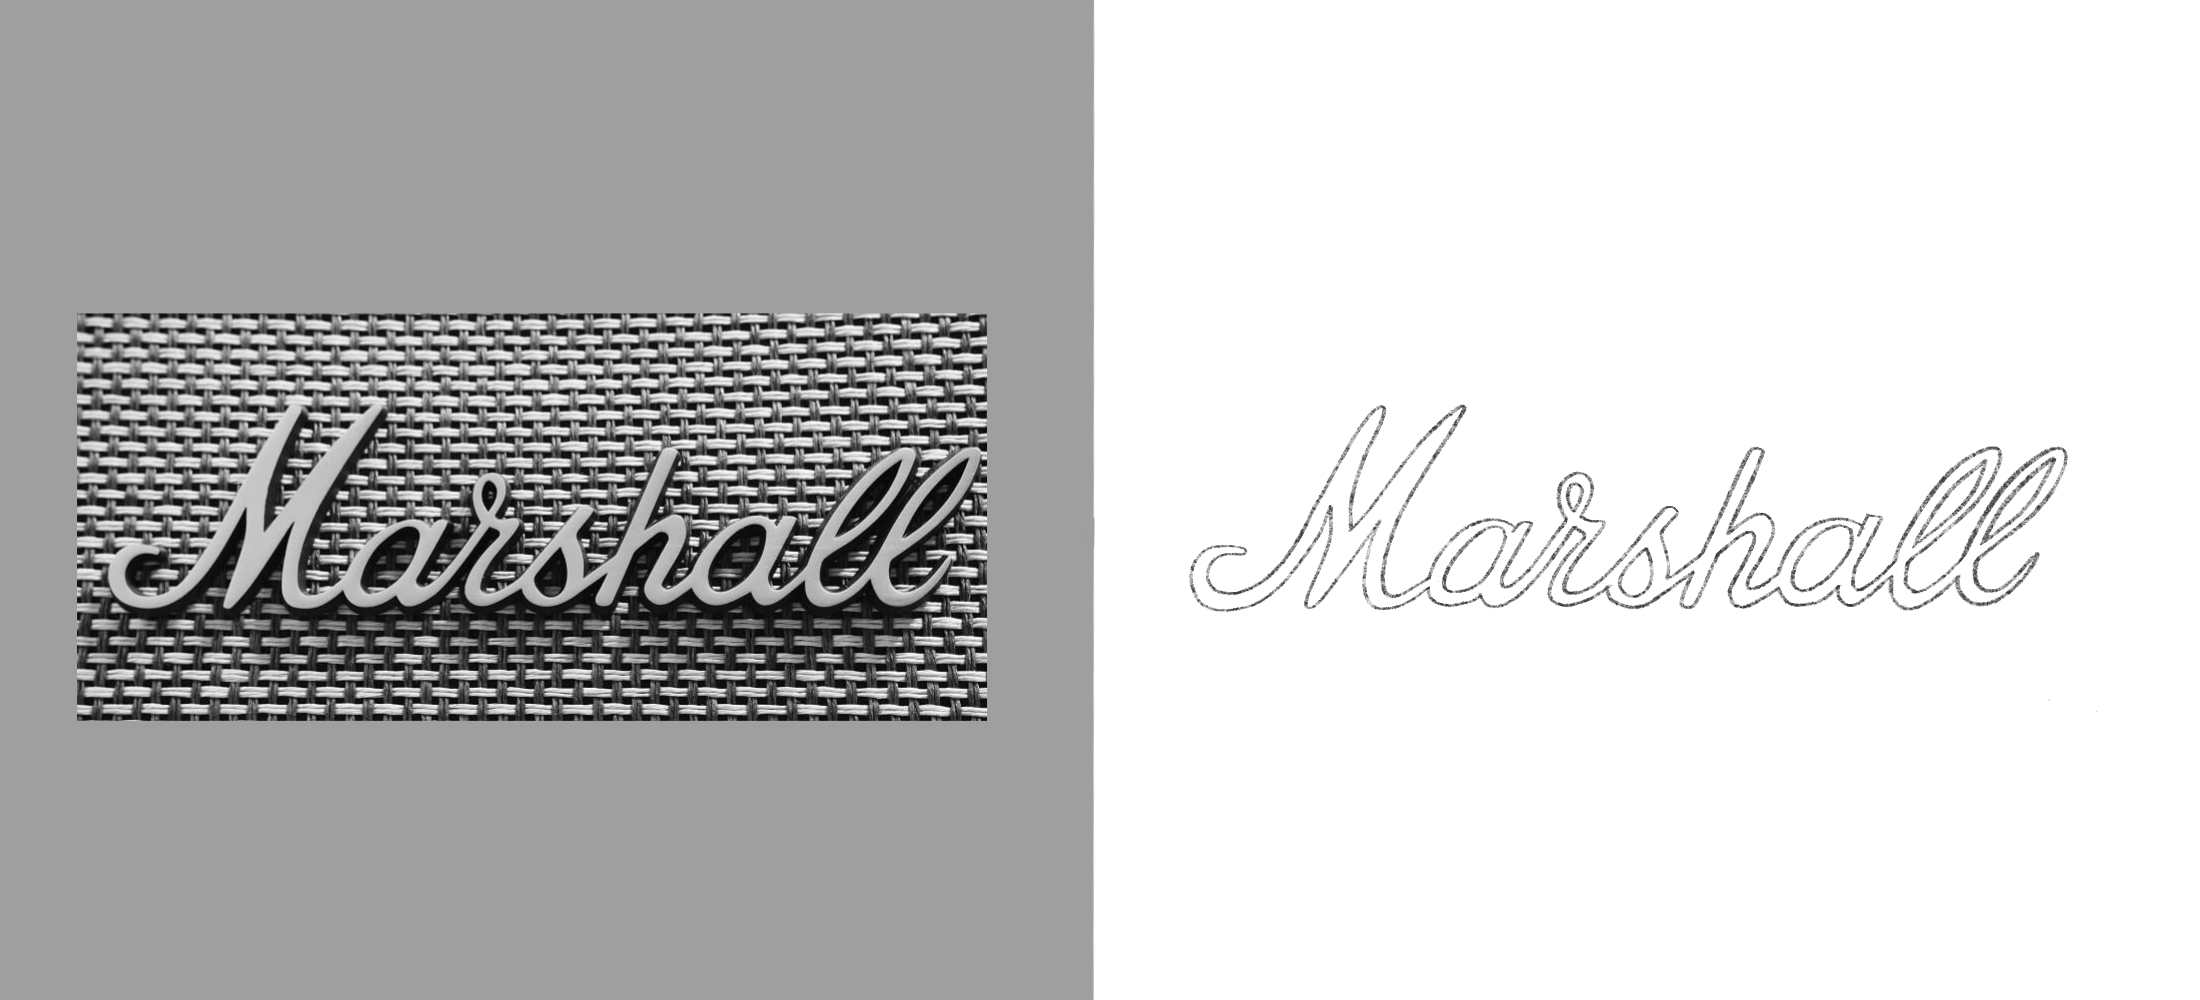 Marshall script logo attached on a grey Marshall speaker alongside a drawn version of the Marshall logo